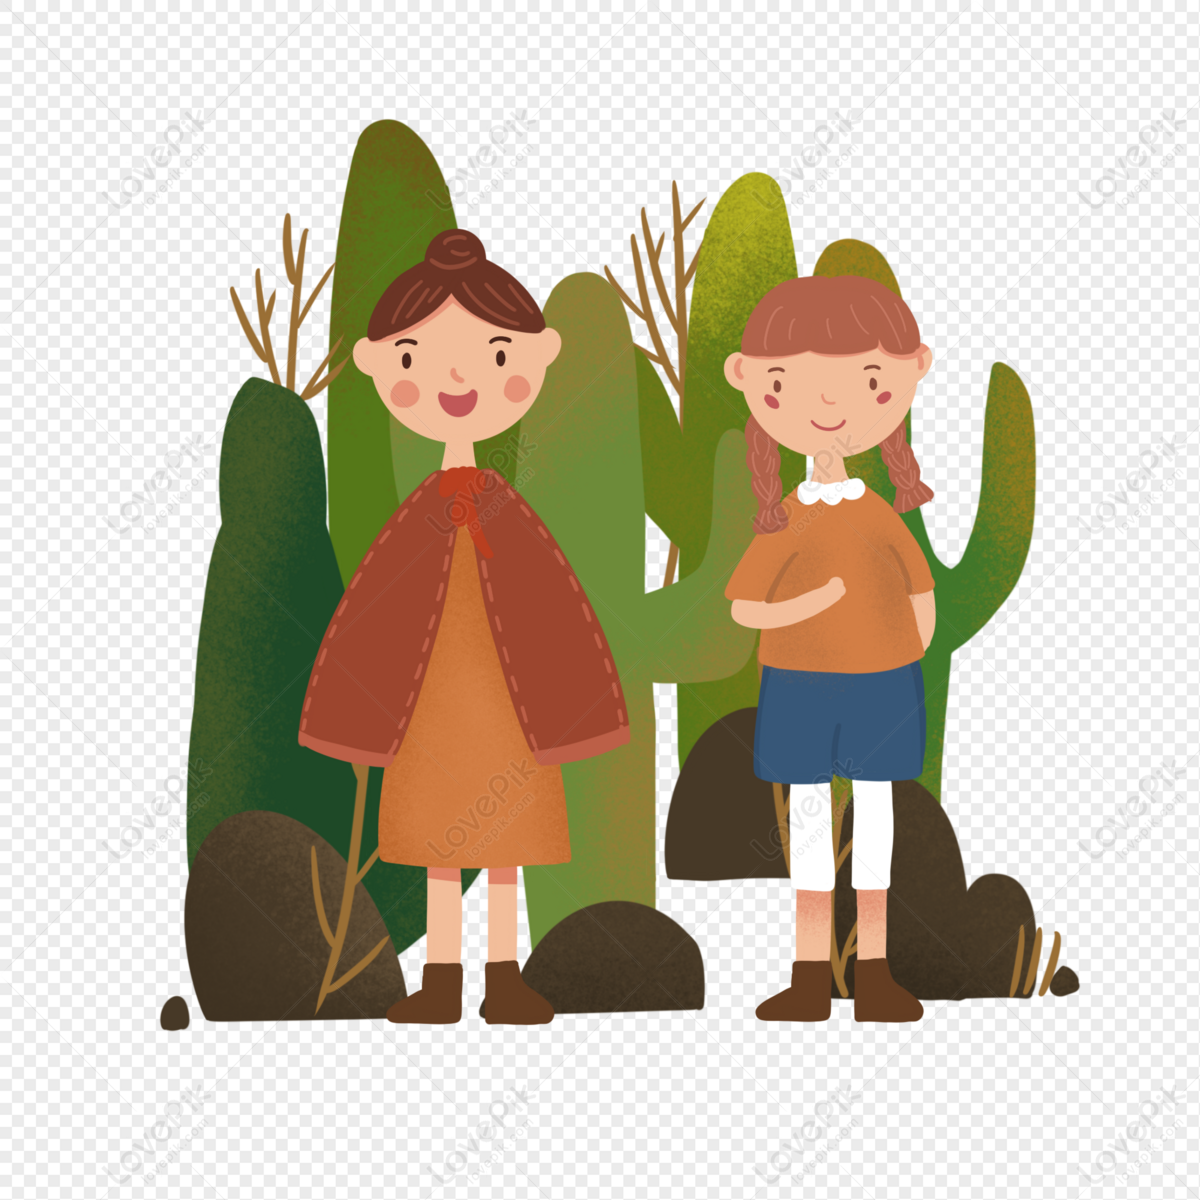 Childrens Day Forest Adventure Kids Free PNG And Clipart Image For Free  Download - Lovepik | 401321039